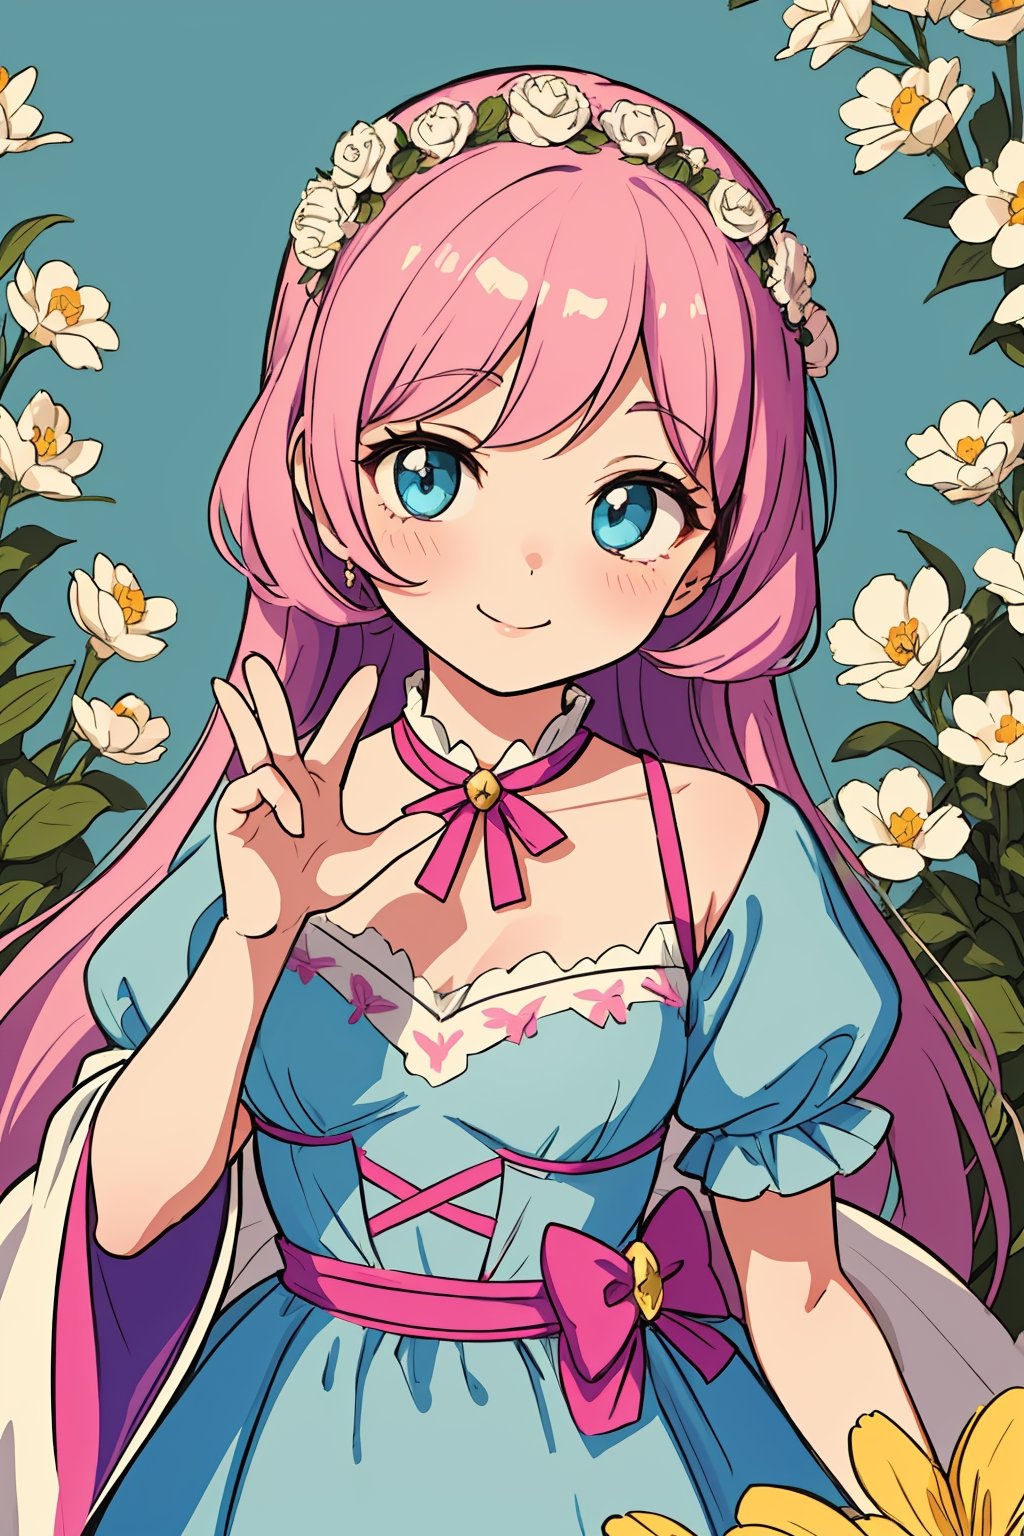 (best quality:1.2), (hyper detailed),

Style:

The character radiates a charming blend of loveliness, cuteness, and a touch of retro and floral aesthetics.
Background:

Immerse the character in a dreamy world with a pastel-colored backdrop. Shades of soft pinks, blues, and purples create a serene and enchanting atmosphere.
Floral Elements:

Adorn the backdrop with vibrant flowers, creating a whimsical and natural setting. These flowers add a touch of elegance and complement the character's floral-themed outfit.
Retro Touch:

Integrate subtle retro elements into the background, perhaps with a vintage pattern or hints of retro-inspired shapes. This adds a nostalgic charm to the overall scene.
Character's Appearance:

Dress the character in a pink-themed outfit with floral patterns, capturing the essence of cuteness and charm. Accessories like a flower crown or retro-inspired details enhance her unique style.
Pose:

Choose a pose that reflects the character's playful and endearing personality. This could include a cute gesture, a shy smile, or any pose that highlights the retro and floral elements.
Close-Up Details:

Capture a close-up of the character's face to showcase intricate details, like sparkly eyes, rosy cheeks, and any distinctive retro or floral accessories.
Effects:

Apply soft and dreamy filters to enhance the overall magical and whimsical quality of the scene. This adds a touch of fantasy and enchantment to the character's surroundings.
Description:

In this captivating template, our character stands in a dreamy world adorned with pastel hues and vibrant flowers. The retro-inspired touches add a hint of nostalgia to her charming appearance. The overall scene radiates loveliness and captures the essence of a whimsical and enchanting atmosphere.